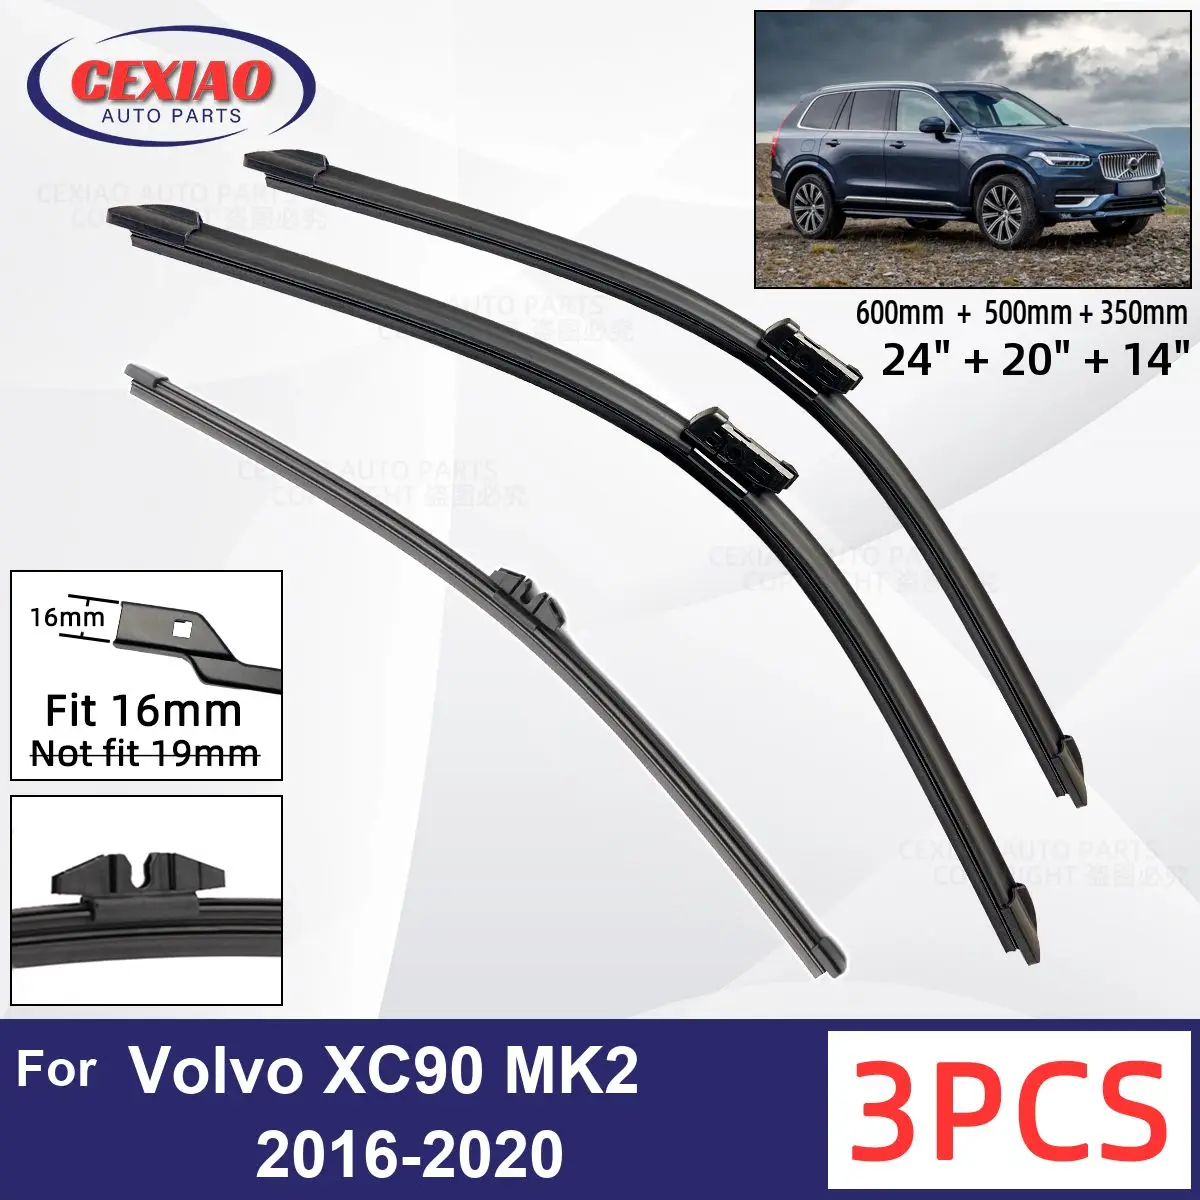 For Volvo XC90 MK2 2016-2020 Car Front Rear Wiper Blades Soft Rubber Win... - $24.98+